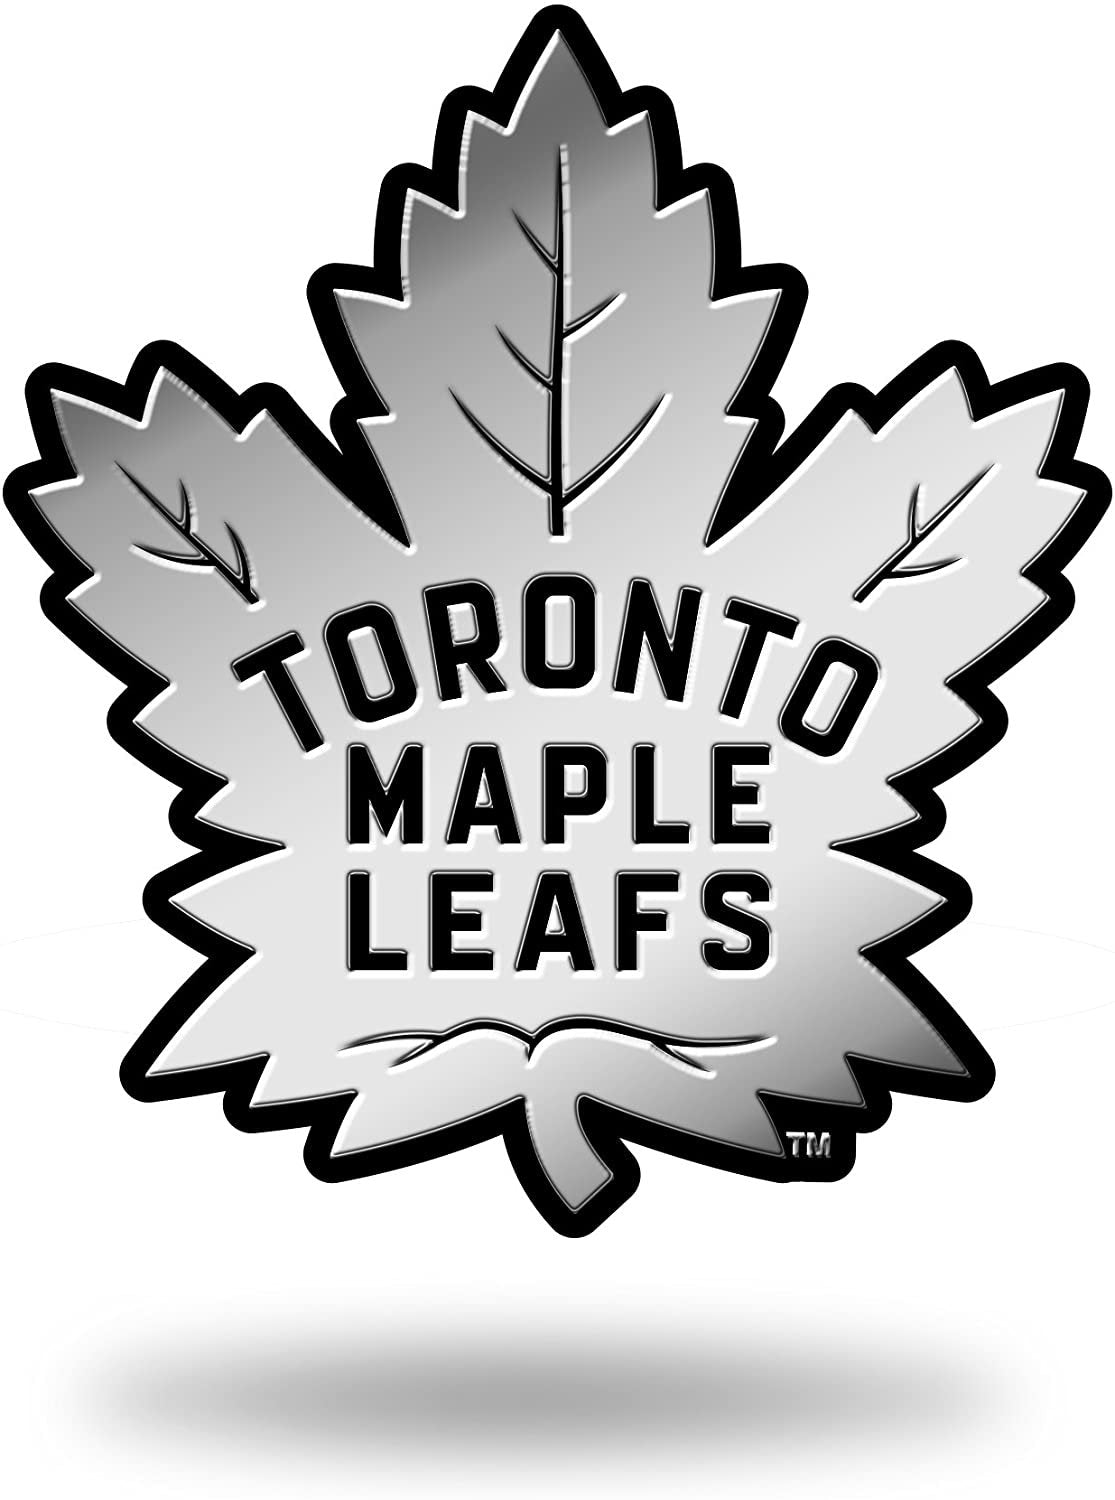 Toronto Maple Leafs Auto Emblem, Silver Chrome Color, Raised Molded Plastic, 3.5 Inch, Adhesive Tape Backing